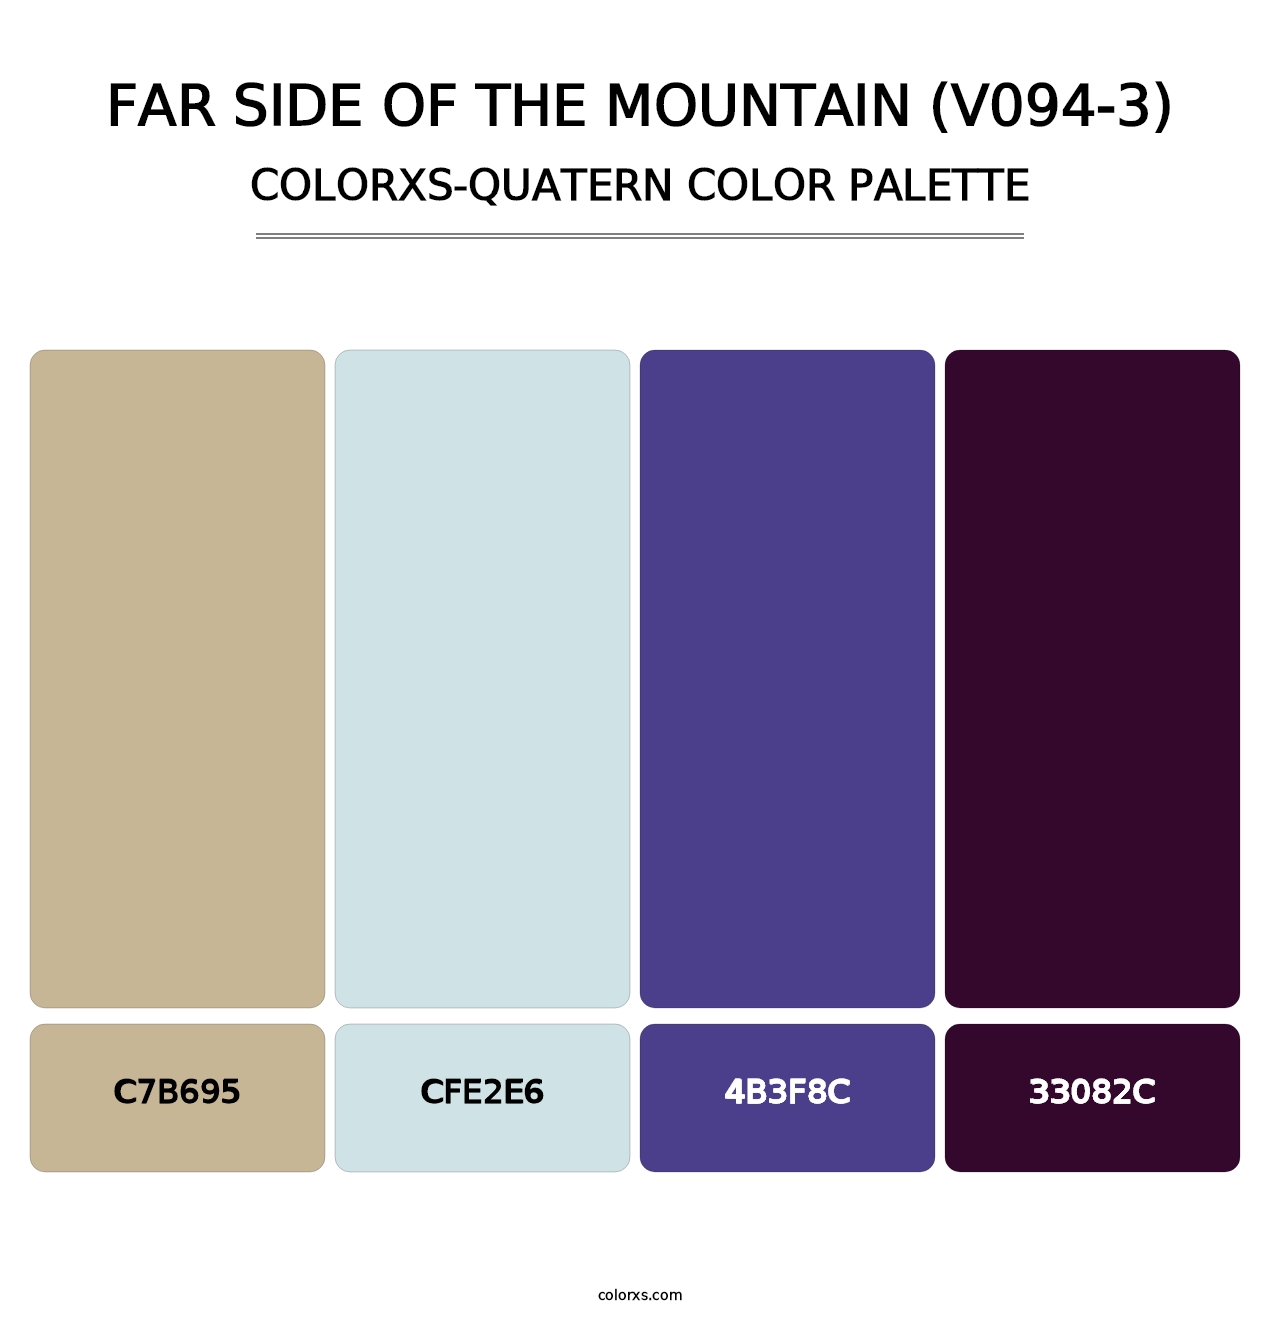 Far Side of the Mountain (V094-3) - Colorxs Quatern Palette